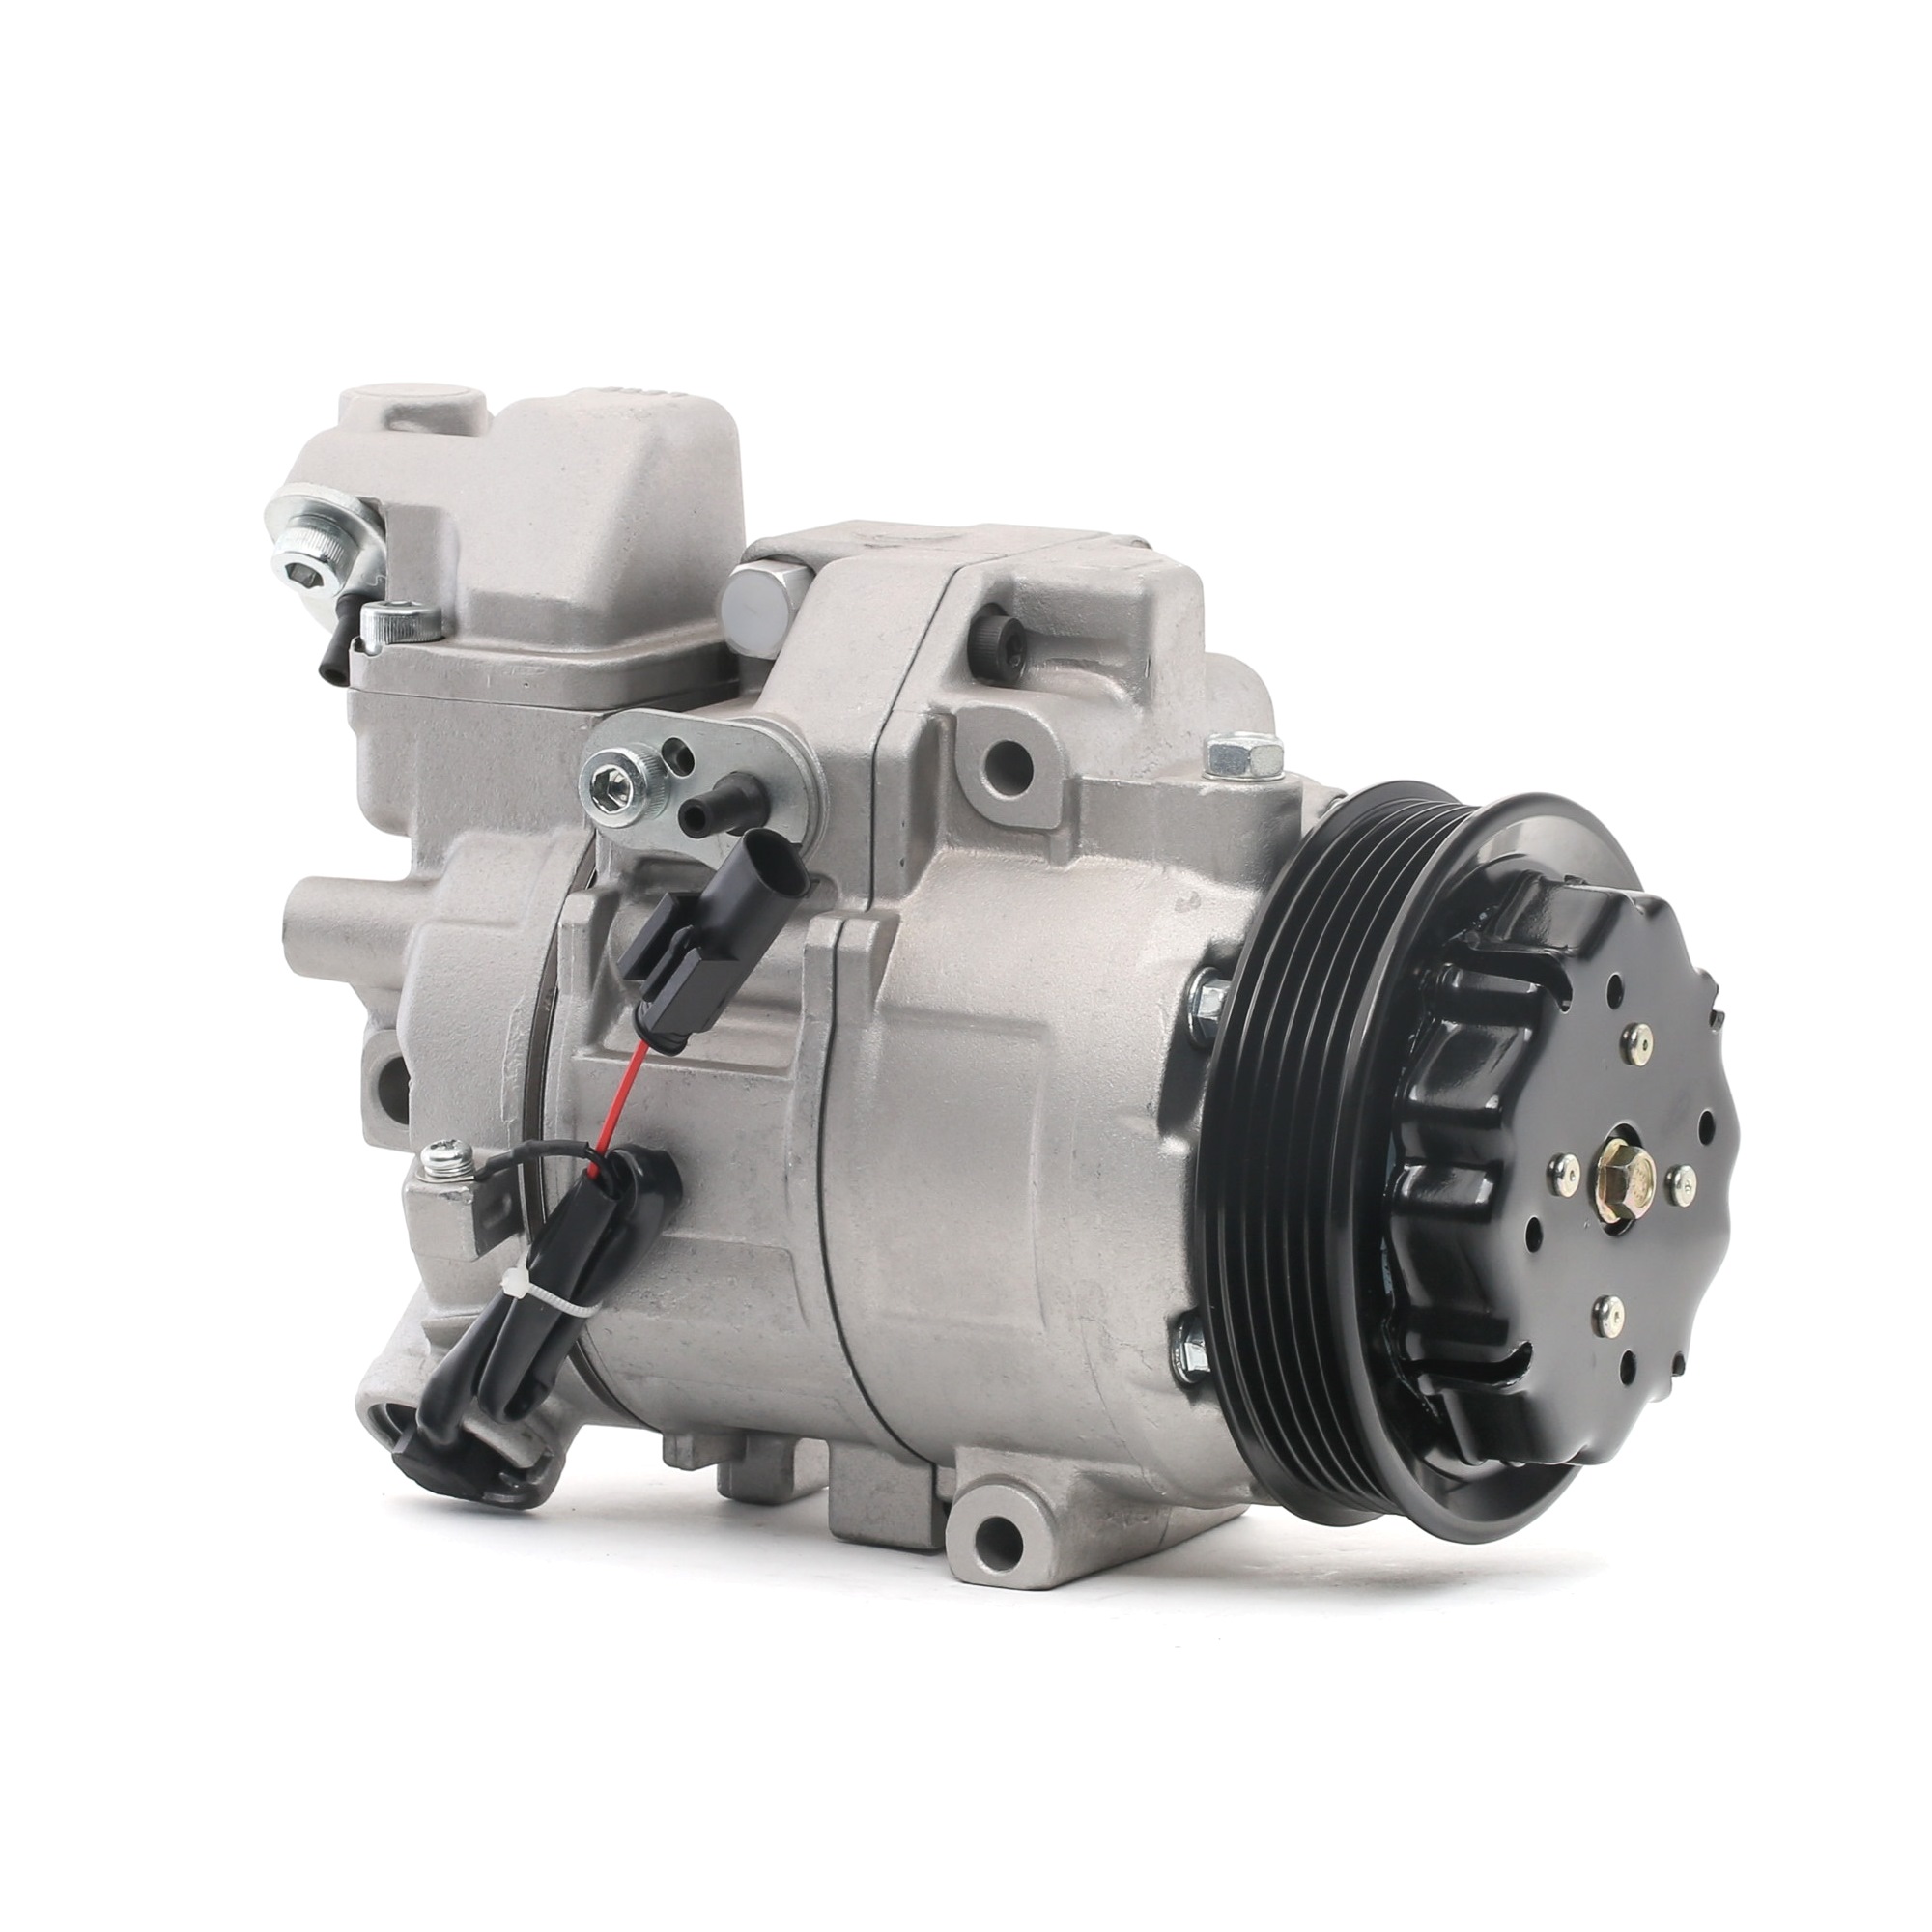 STARK SKKM-0340229 Air conditioning compressor MERCEDES-BENZ experience and price